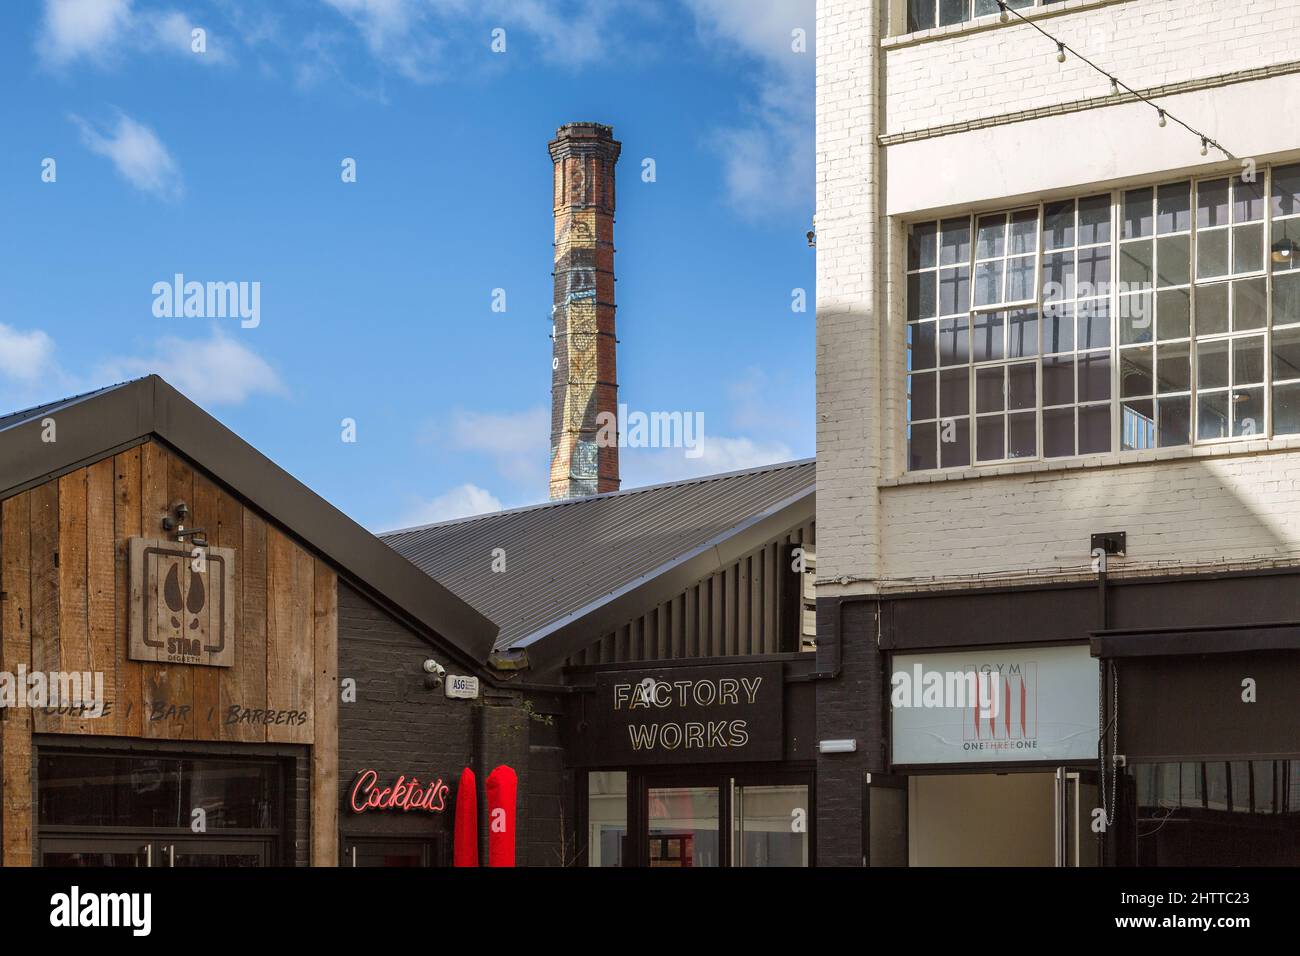 The Alfie Mo mural on the 30m tall brick chimney at the rear of the Custard Factory, a business and shopping hub set in converted Victorian factories. Stock Photo